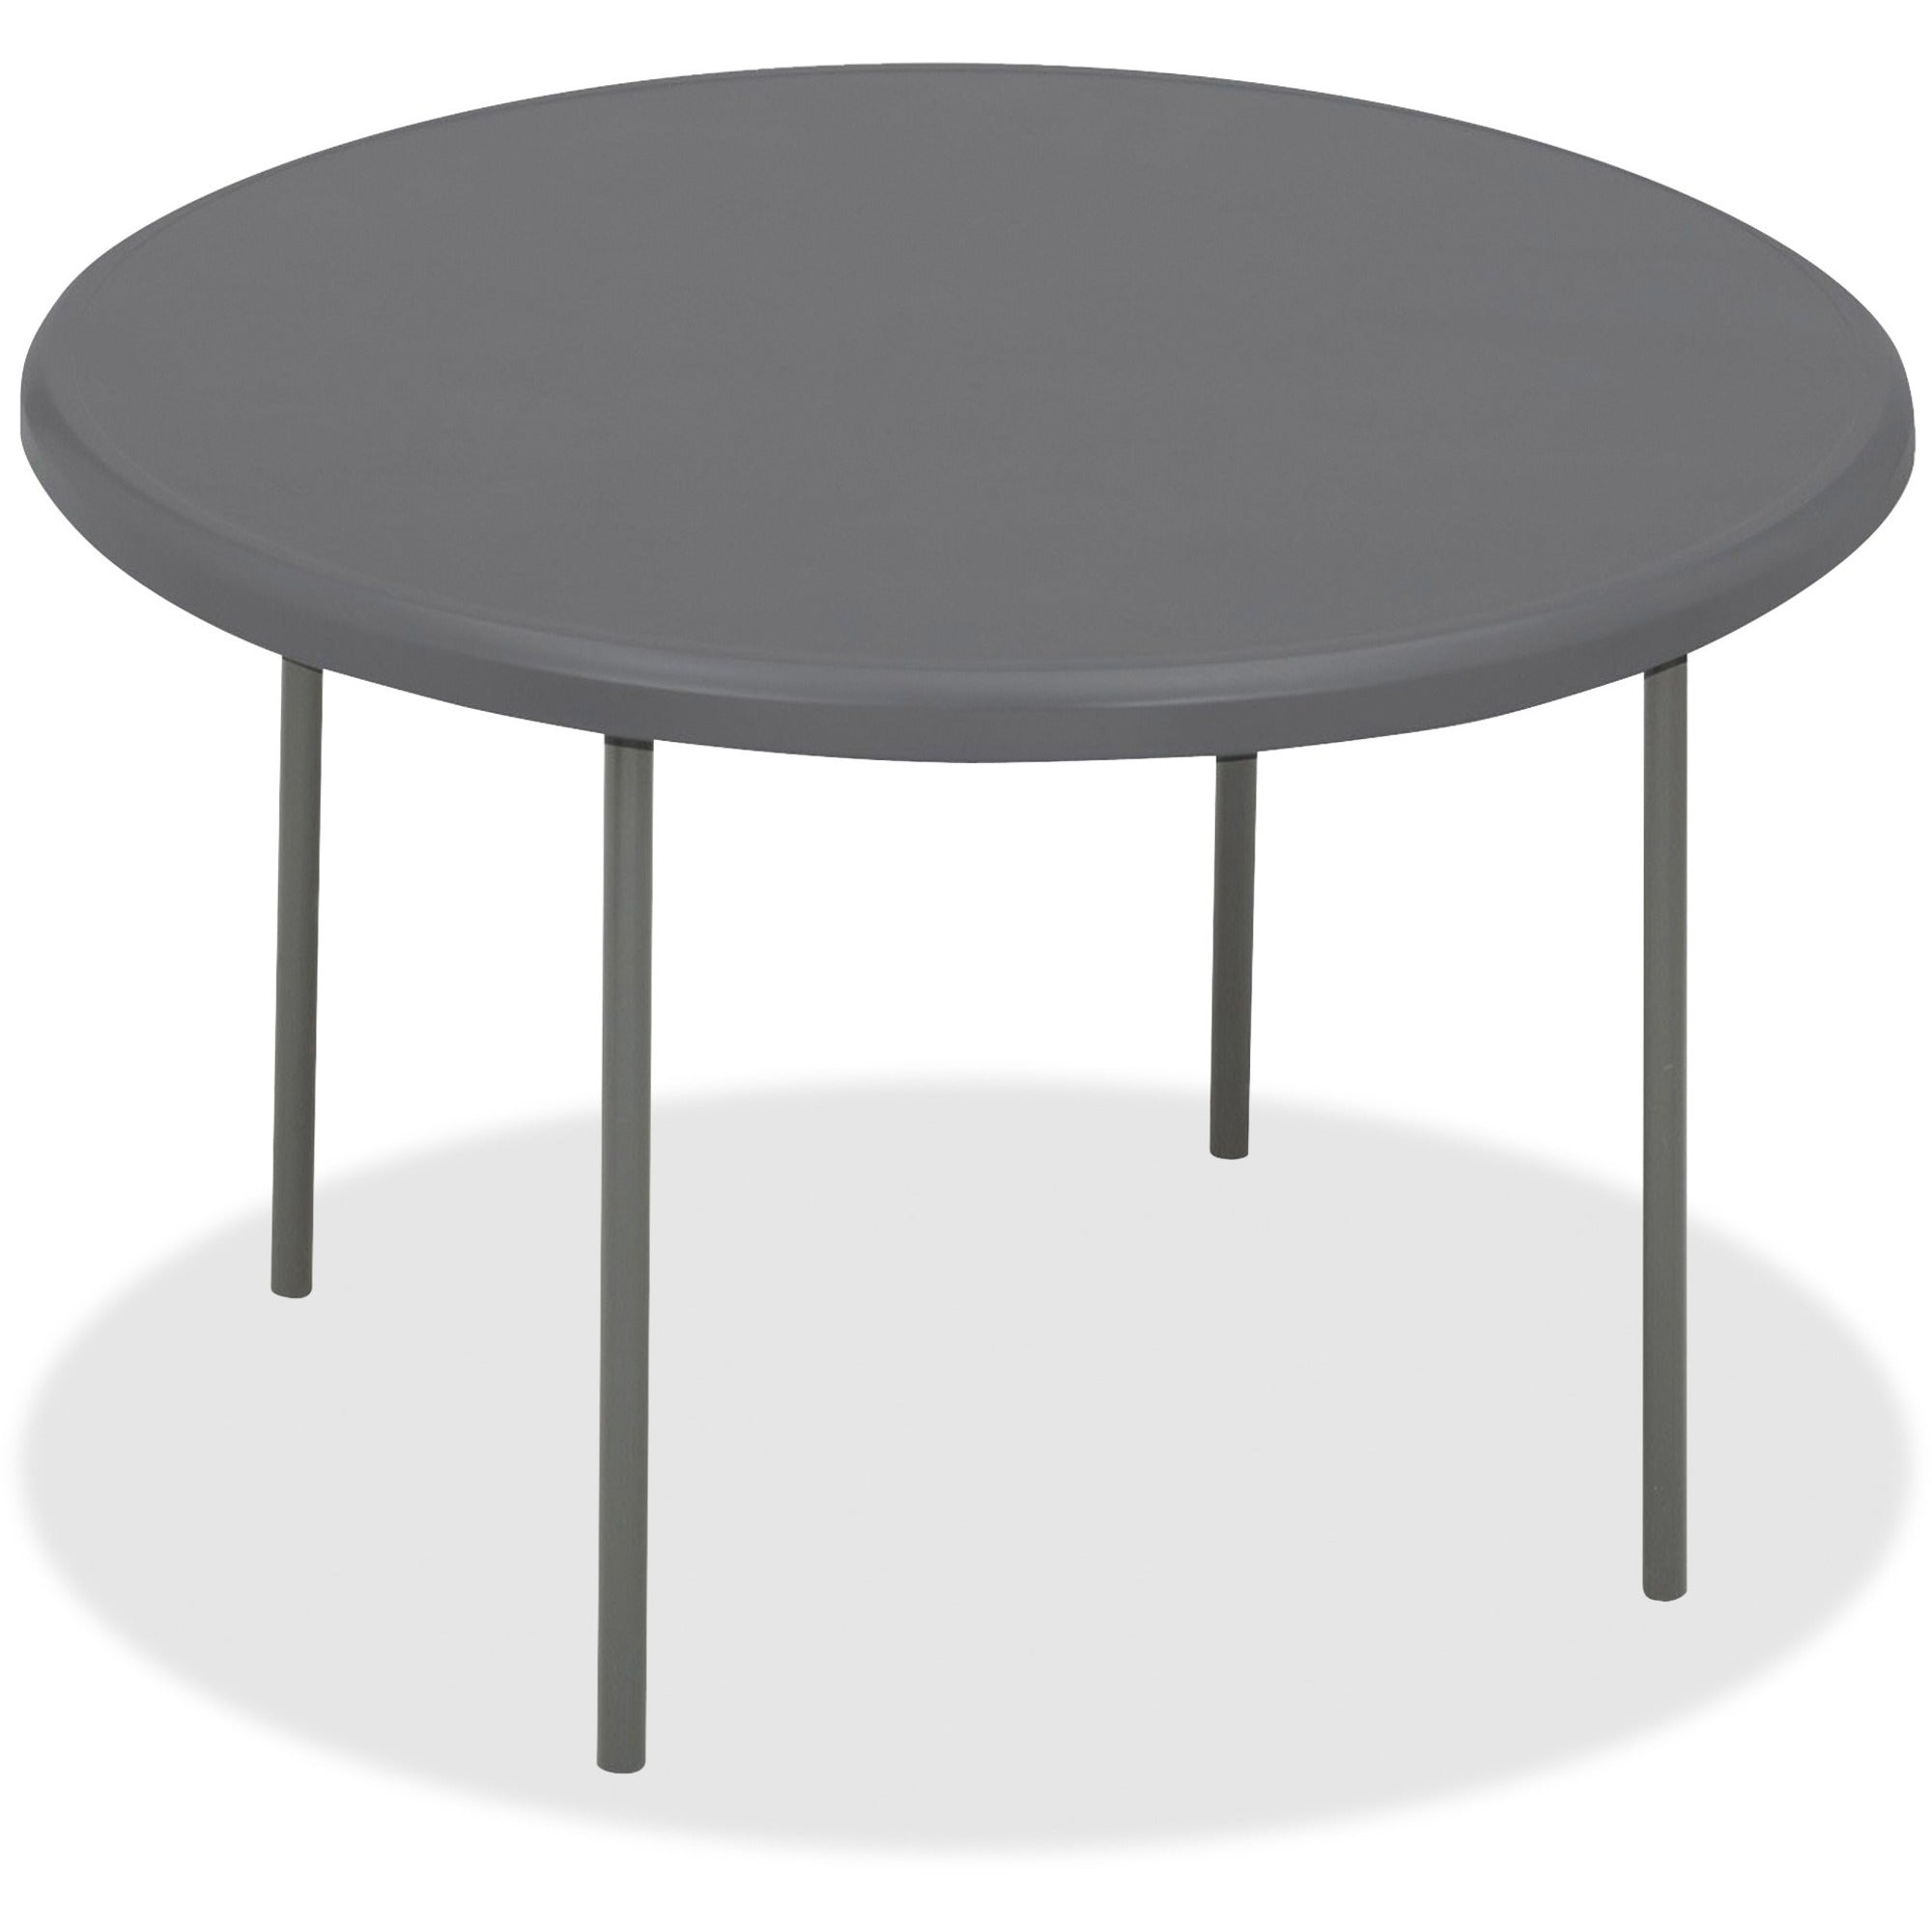 Iceberg IndestrucTable TOO Folding Table - For - Table TopRound Top - Four Leg Base - 4 Legs x 2" Table Top Thickness x 60" Table Top Diameter - Charcoal, Powder Coated - High-density Polyethylene (HDPE), Steel - 1 Each